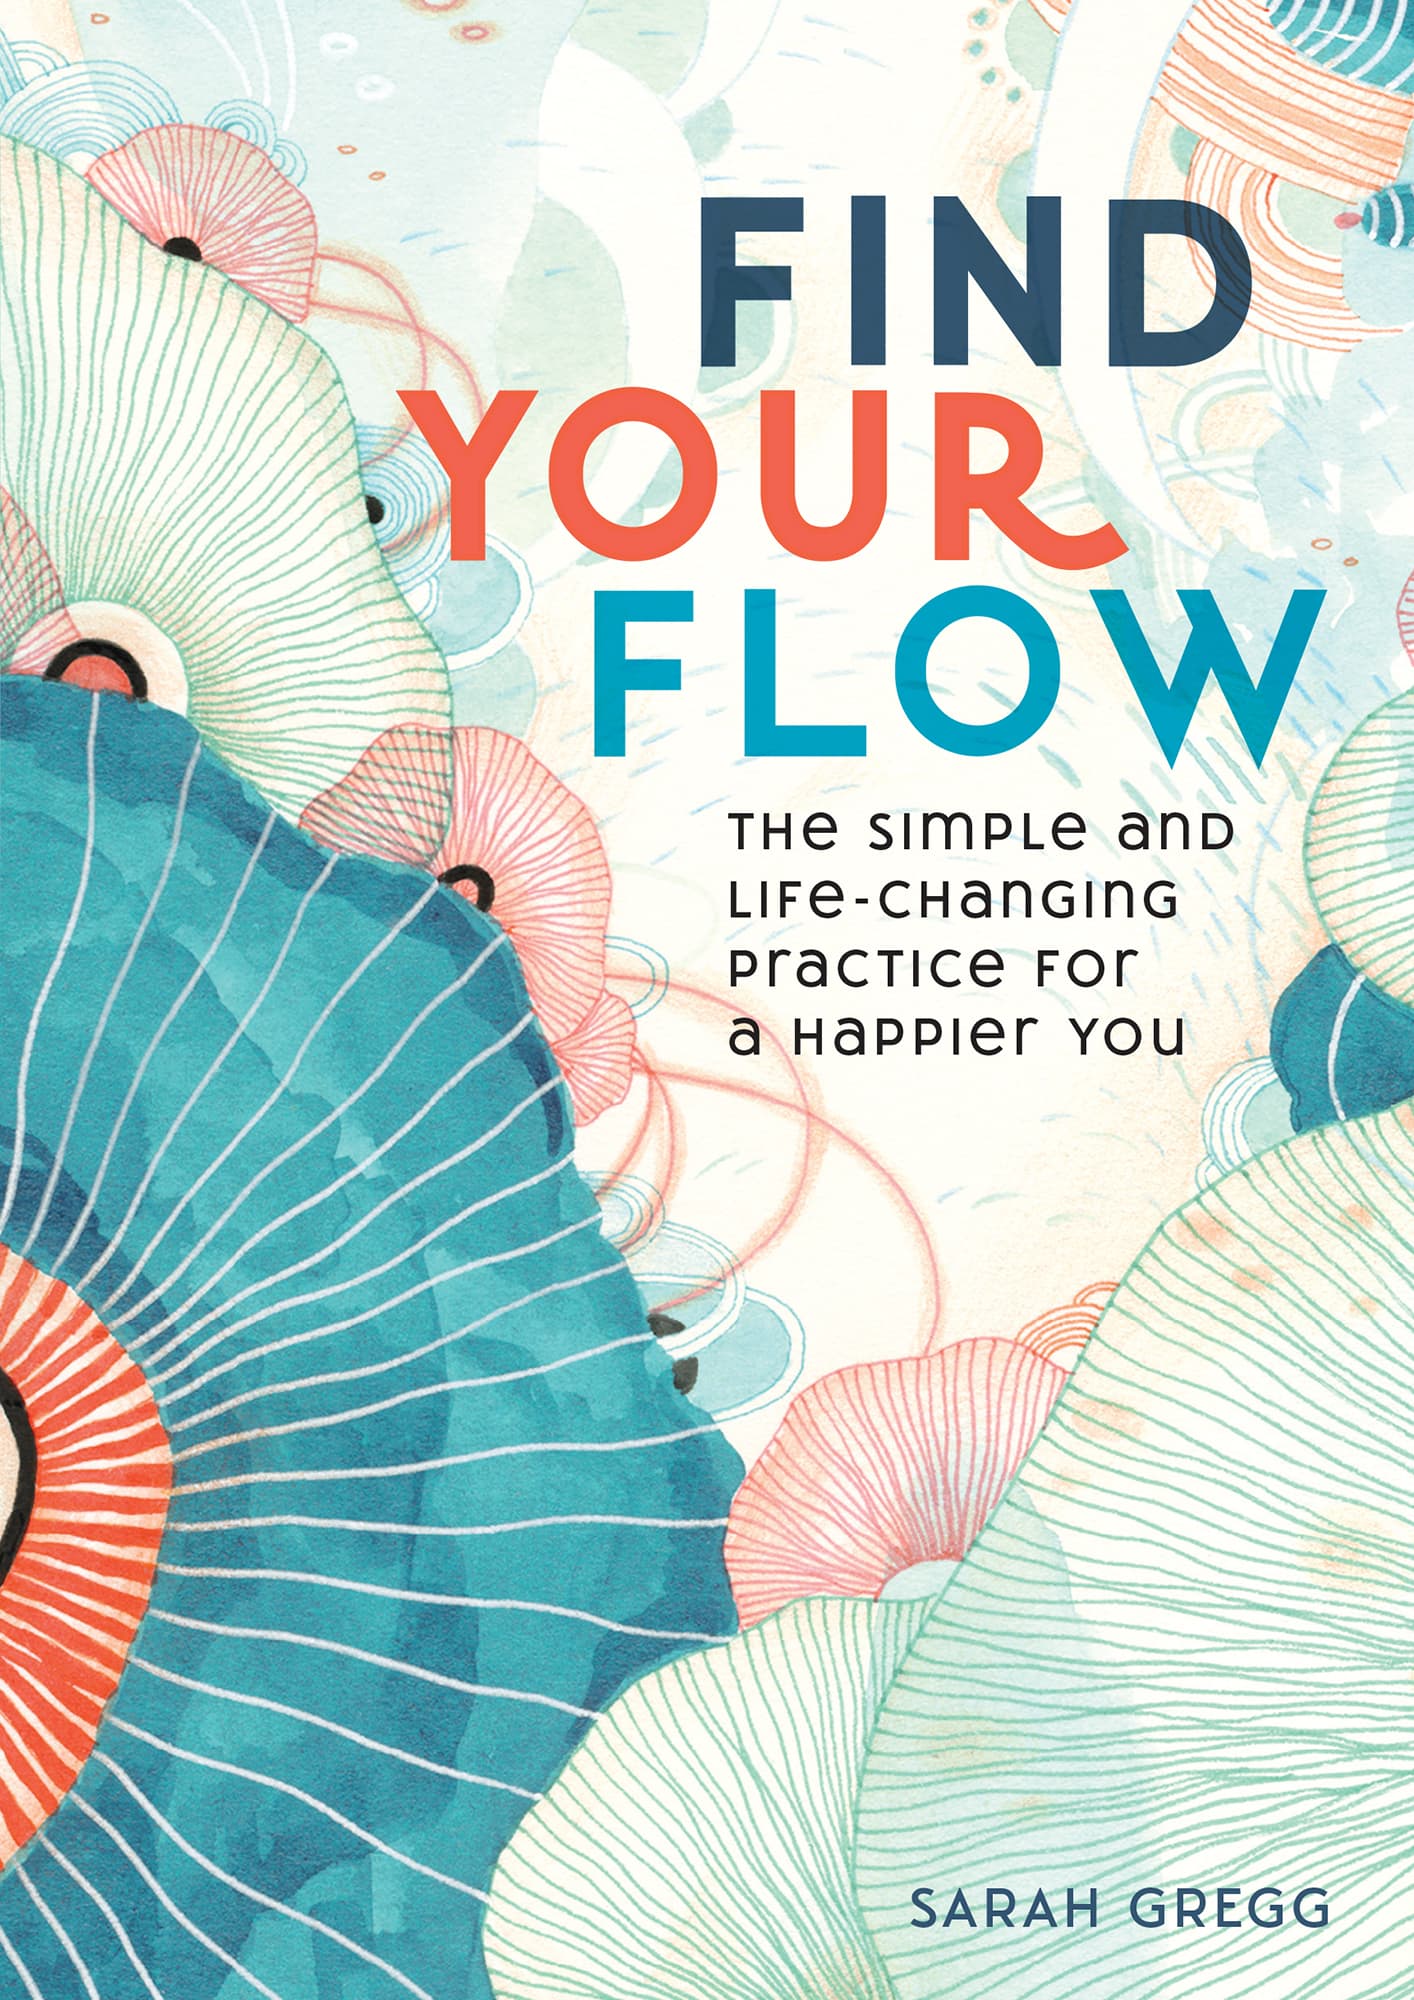 FIND YOUR FLOW The Simple and Life-Changing Practice for a Happier You - photo 1